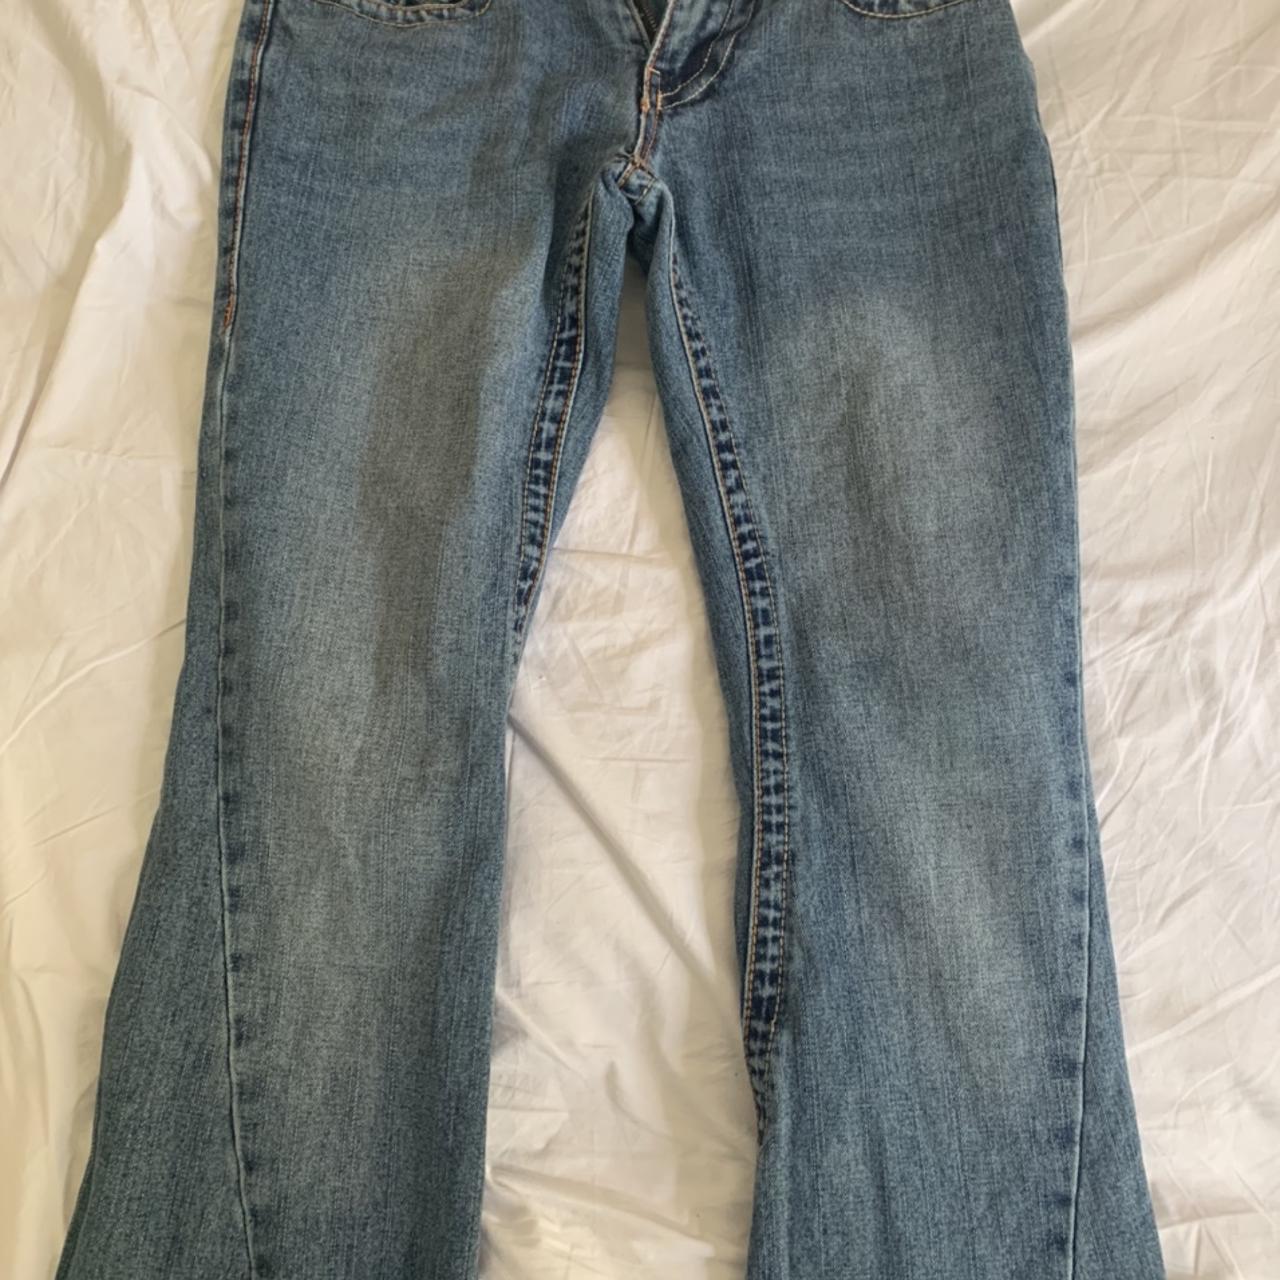 Vintage flared true religion jeans with colourful... - Depop